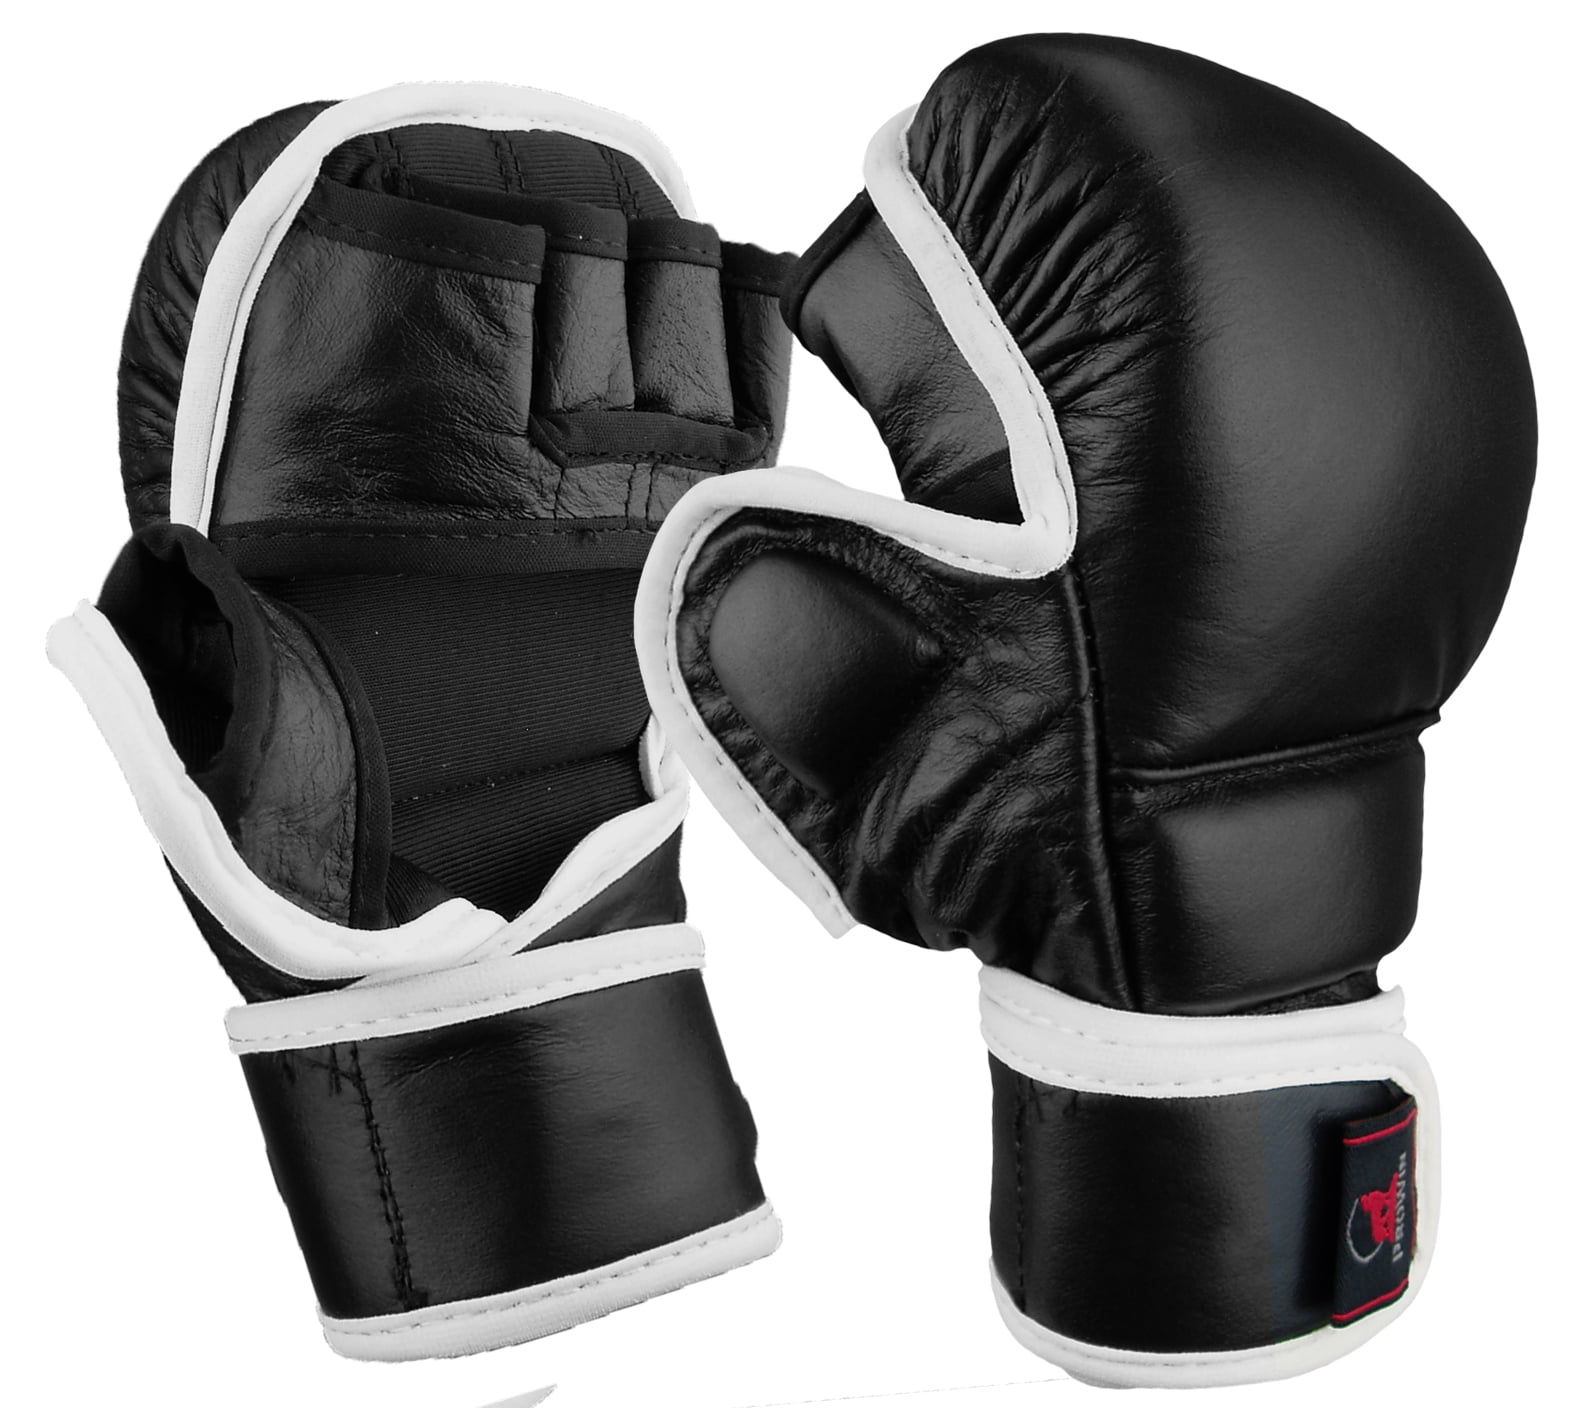 All Sizes! Competition Sparring Training Cobra Gloves 